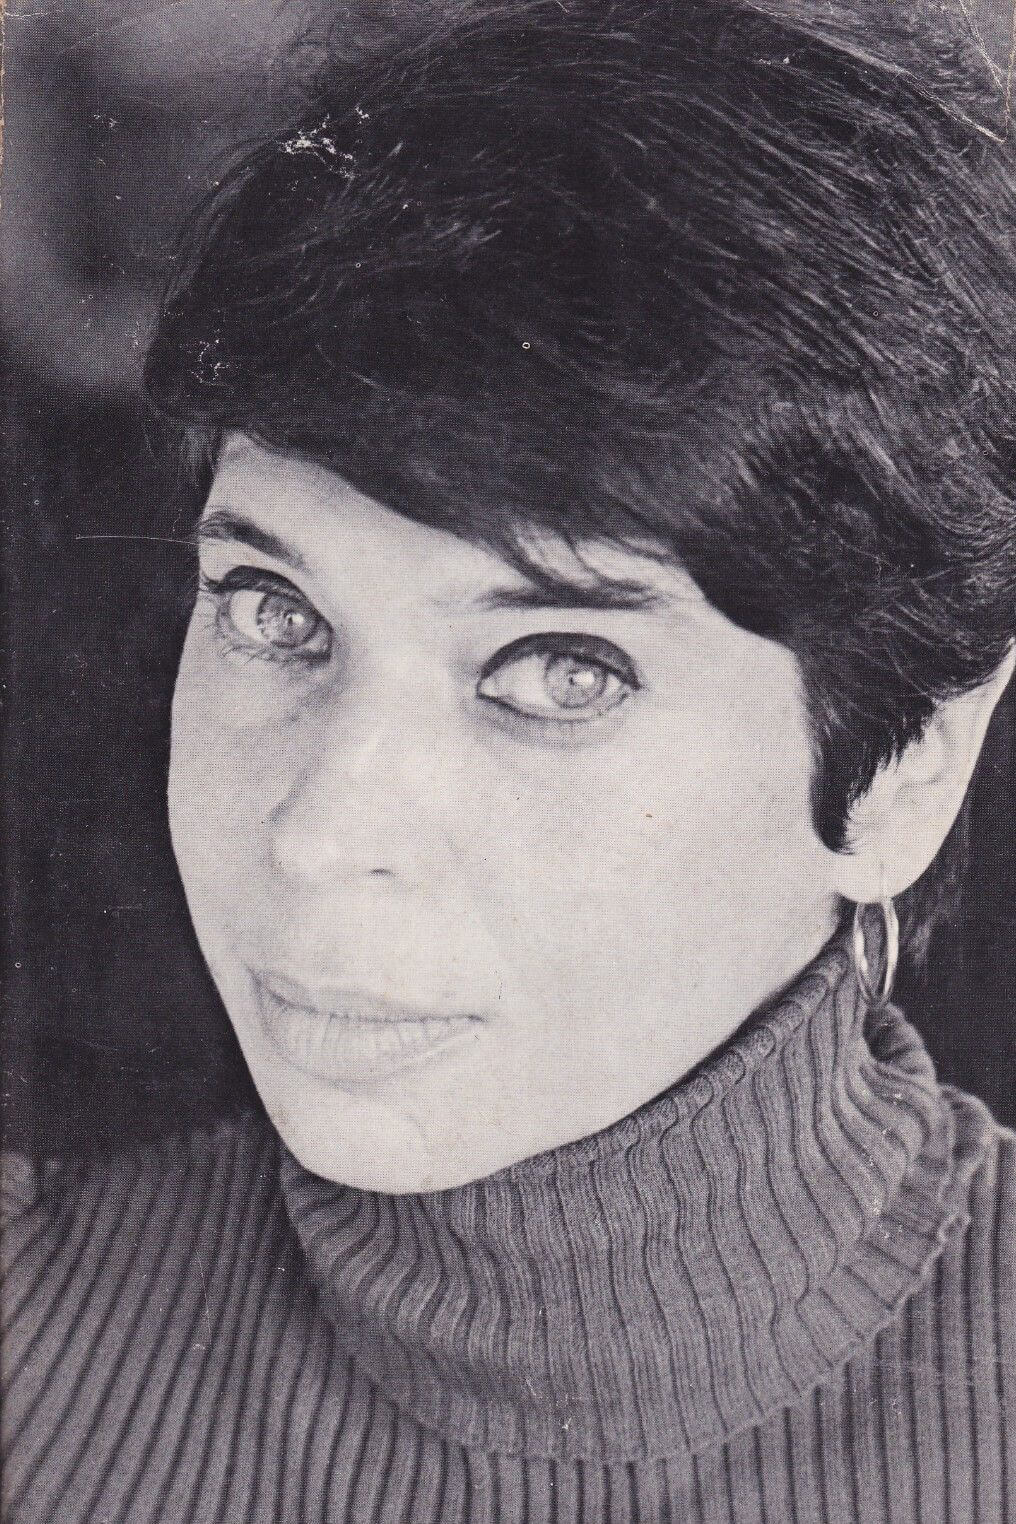 Portrait of Vivian Gornick on the back jacket of her cult <em>The Romance of American Communism</em> (1977), which is being reissued by Verso this year.